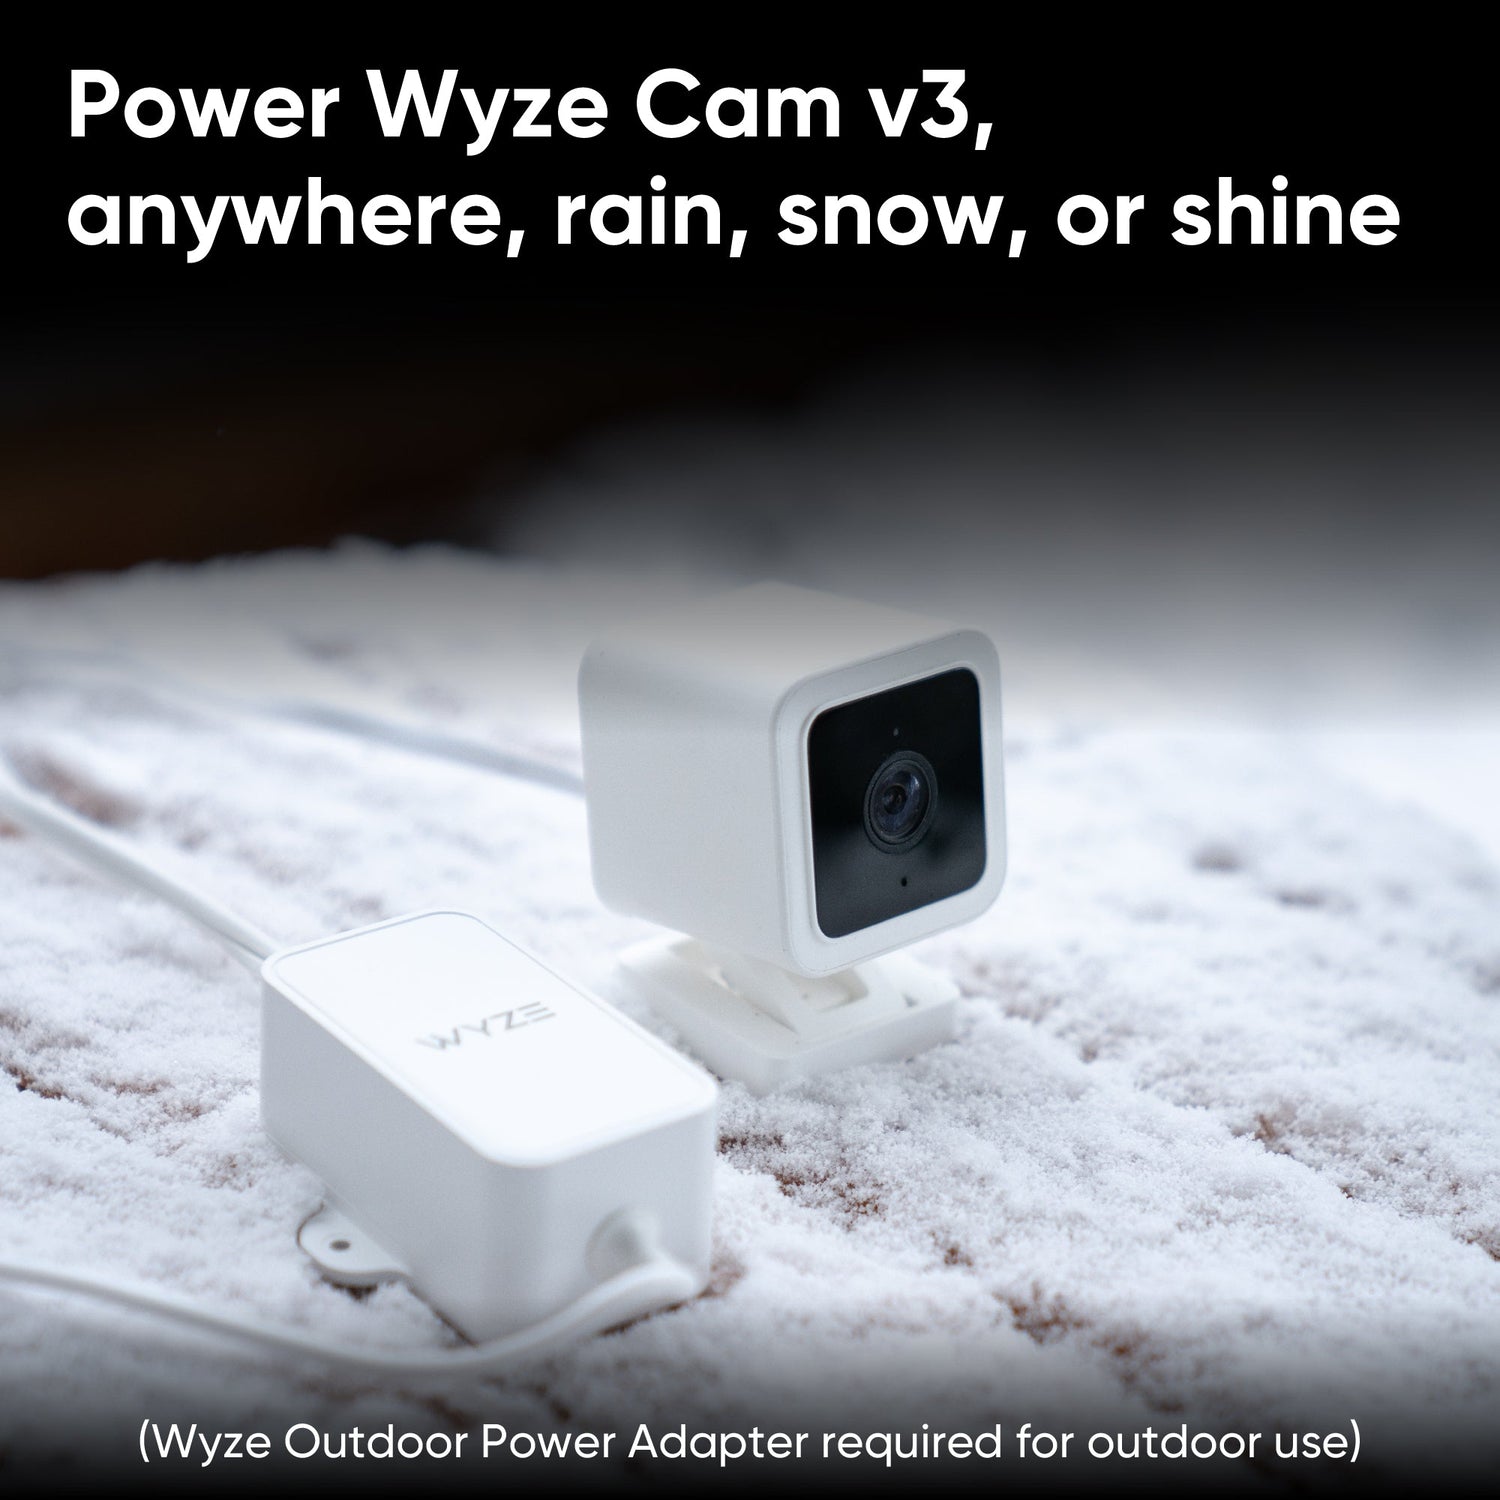 My solution to avoiding the cost of the Wyze Outdoor Power Adapter